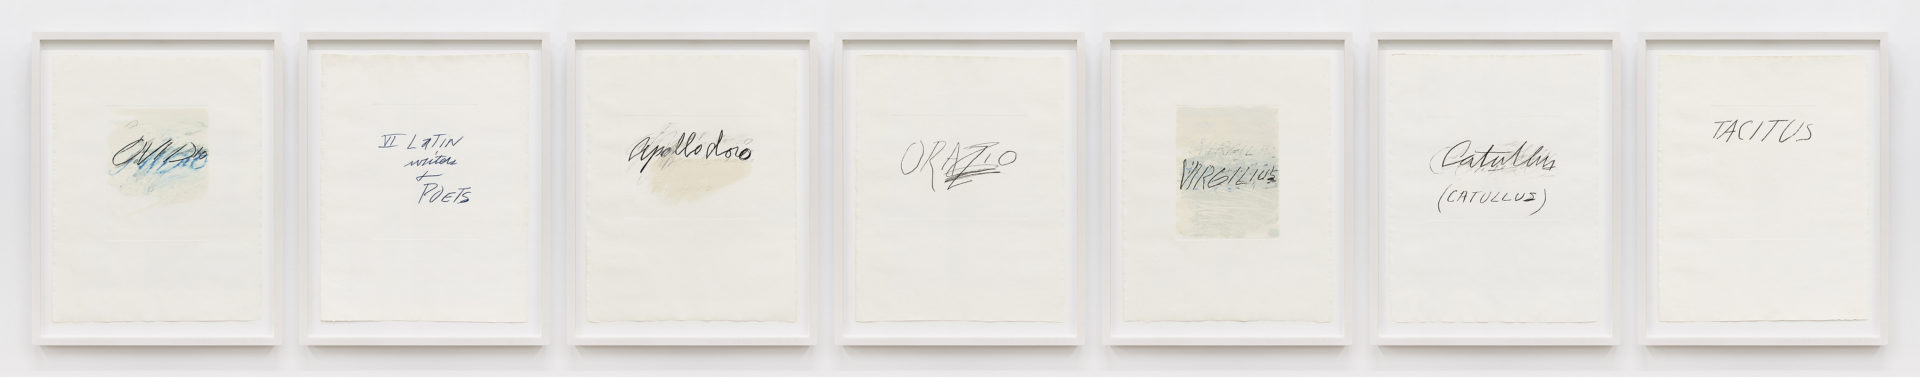 Cy Twombly Six Latin Writers and Poets, 1976 Seven lithographs printed in color with embossing Image Dimensions: 25 3/8 x 19 3/4 inches (64.5 x 50.2 cm) each Framed Dimensions: 29 1/2 x 23 1/2 inches (74.9 x 59.7 cm) each Edition of 60